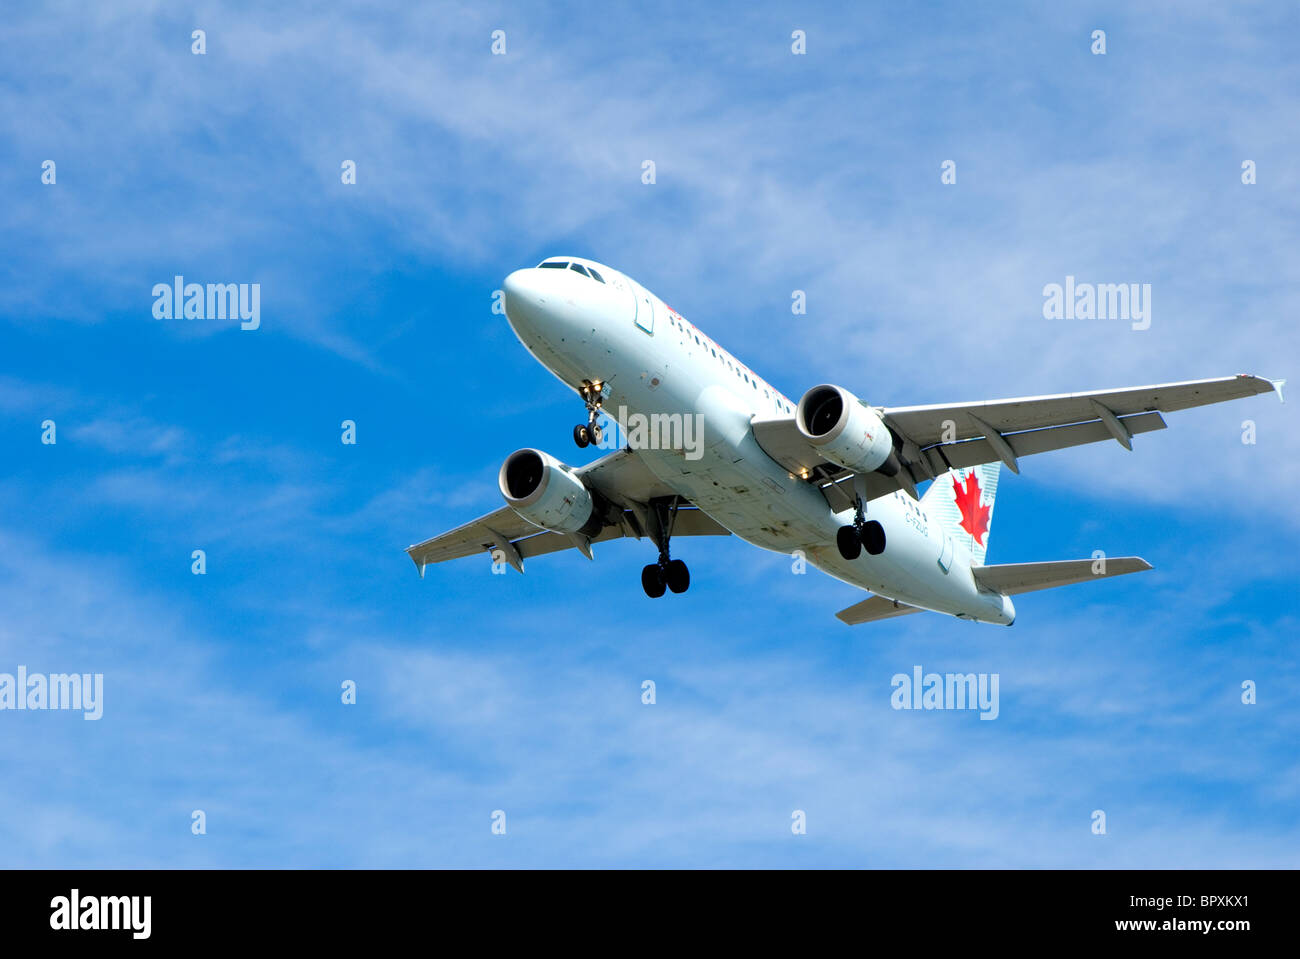 Air Canada plane with landing gear down coming in for final approach to airport Stock Photo